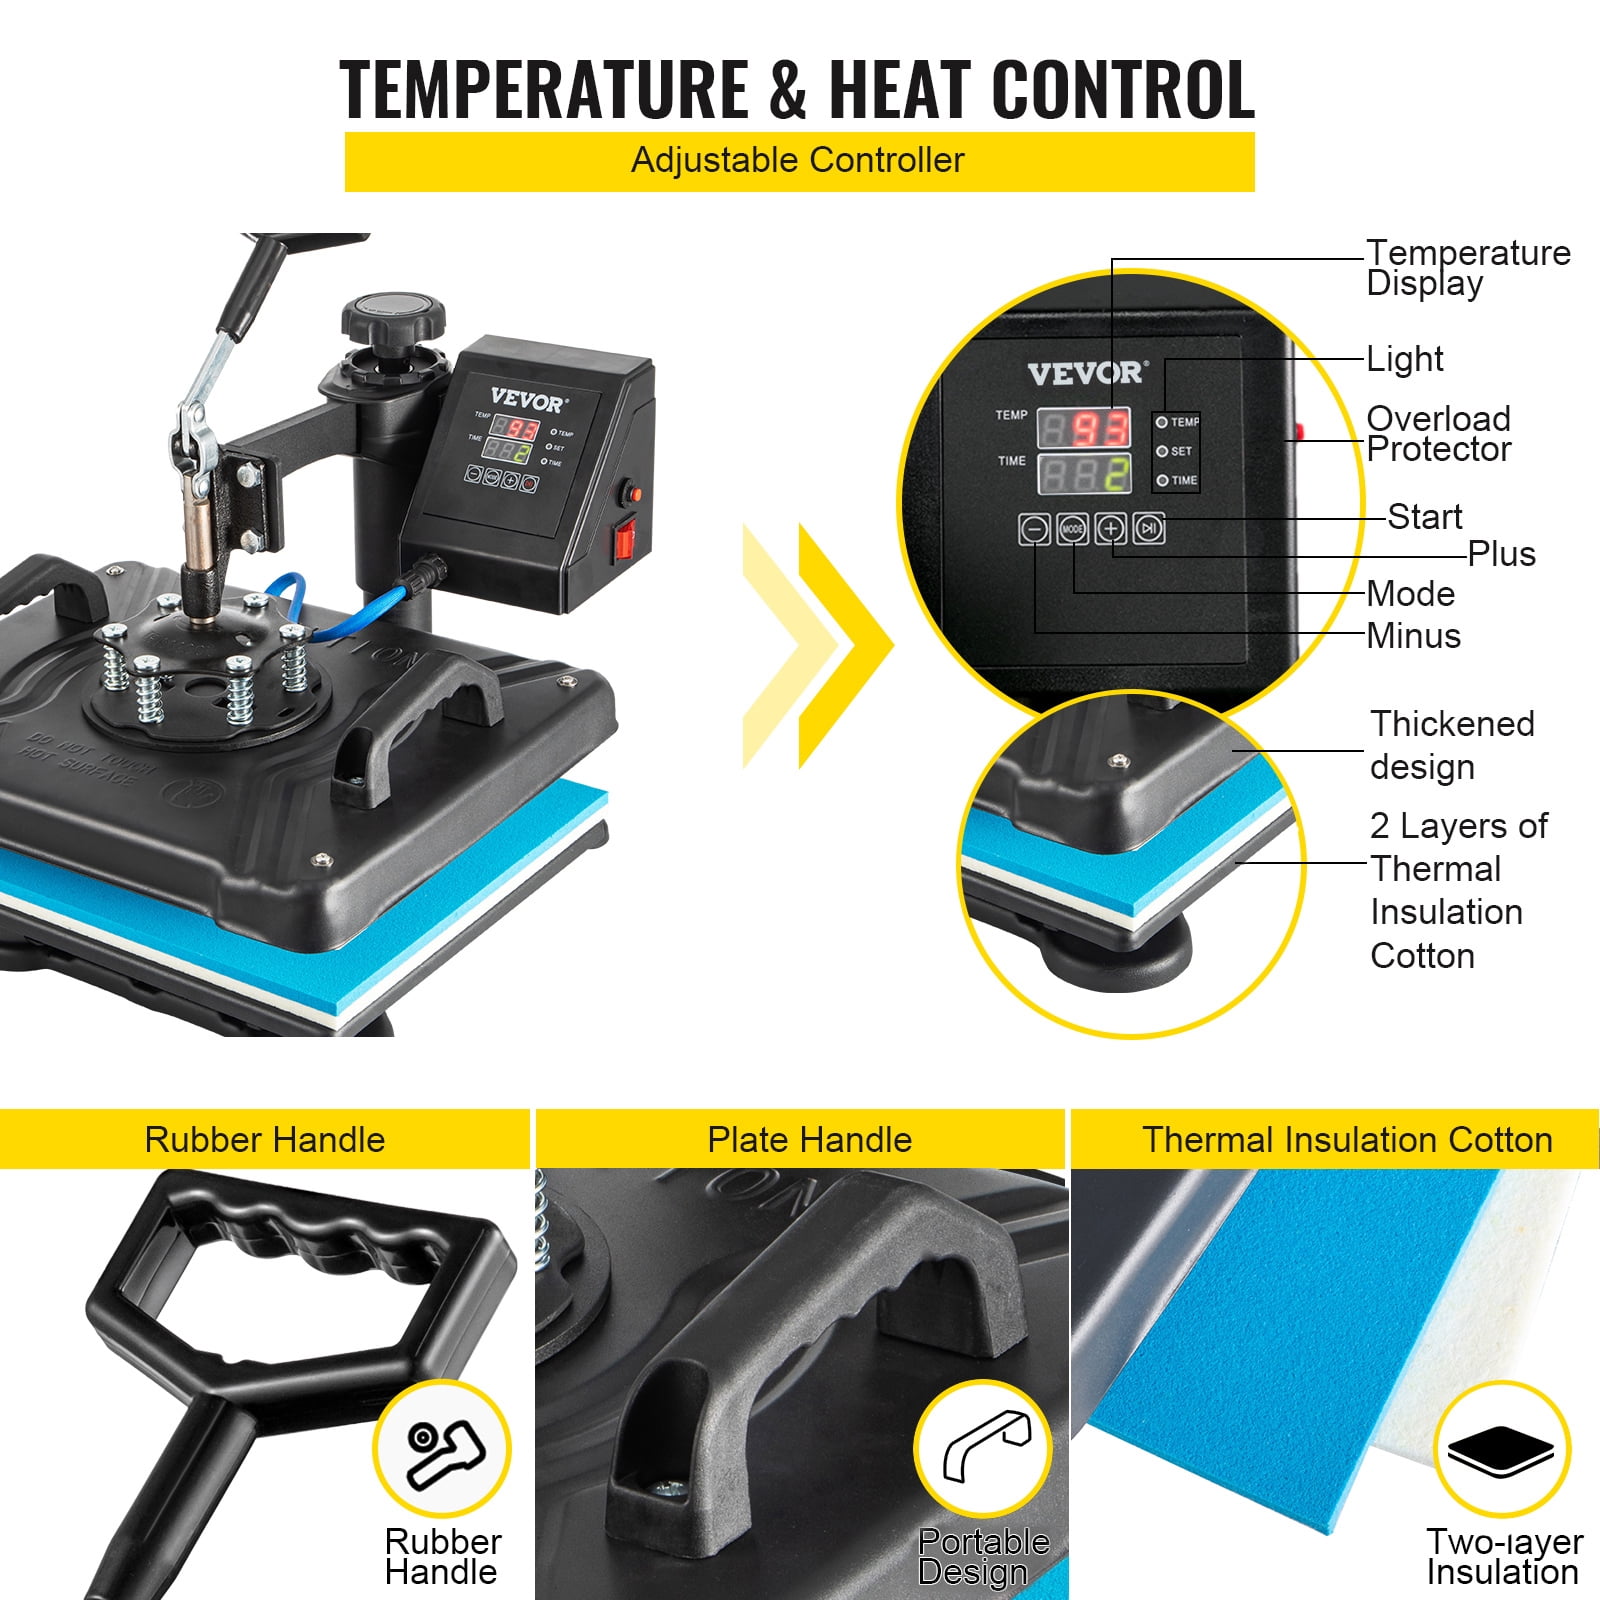 Mastering the VEVOR Heat Press 15x15 8 in 1: Unboxing, Setup, and